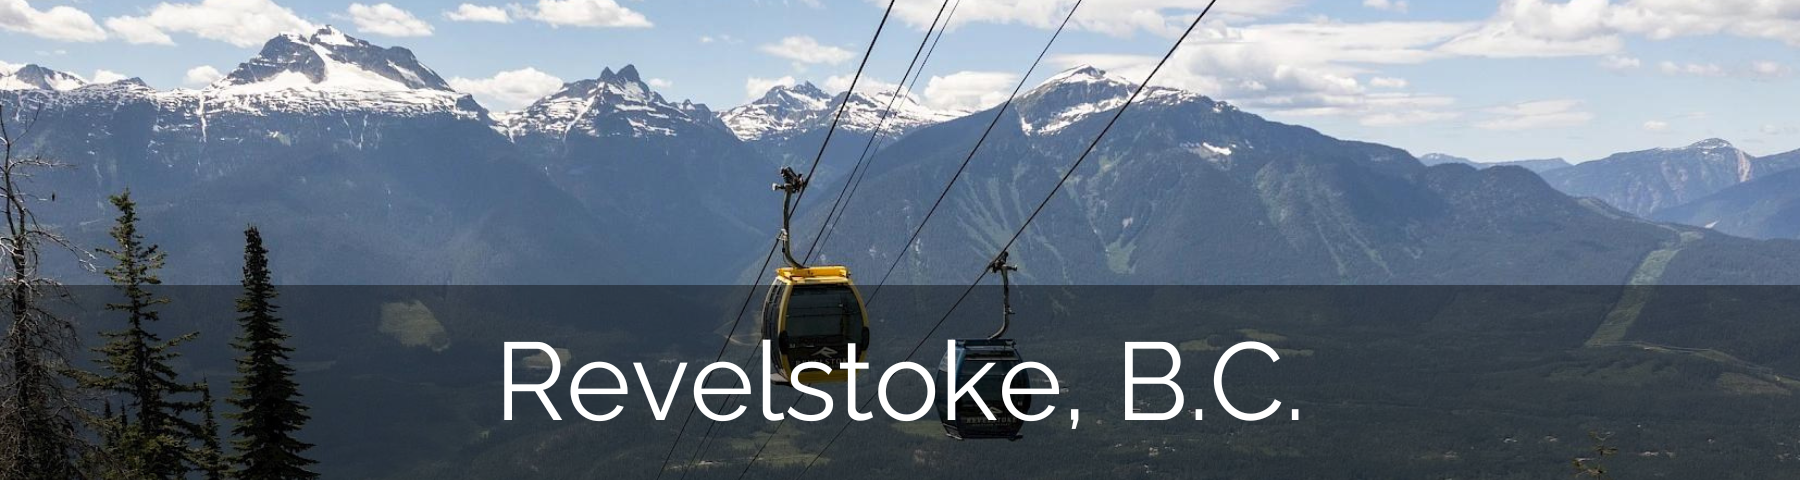 Investment Opportunities Revelstoke British Columbia Short Term Accommodations Porperties Vacation Rental Management